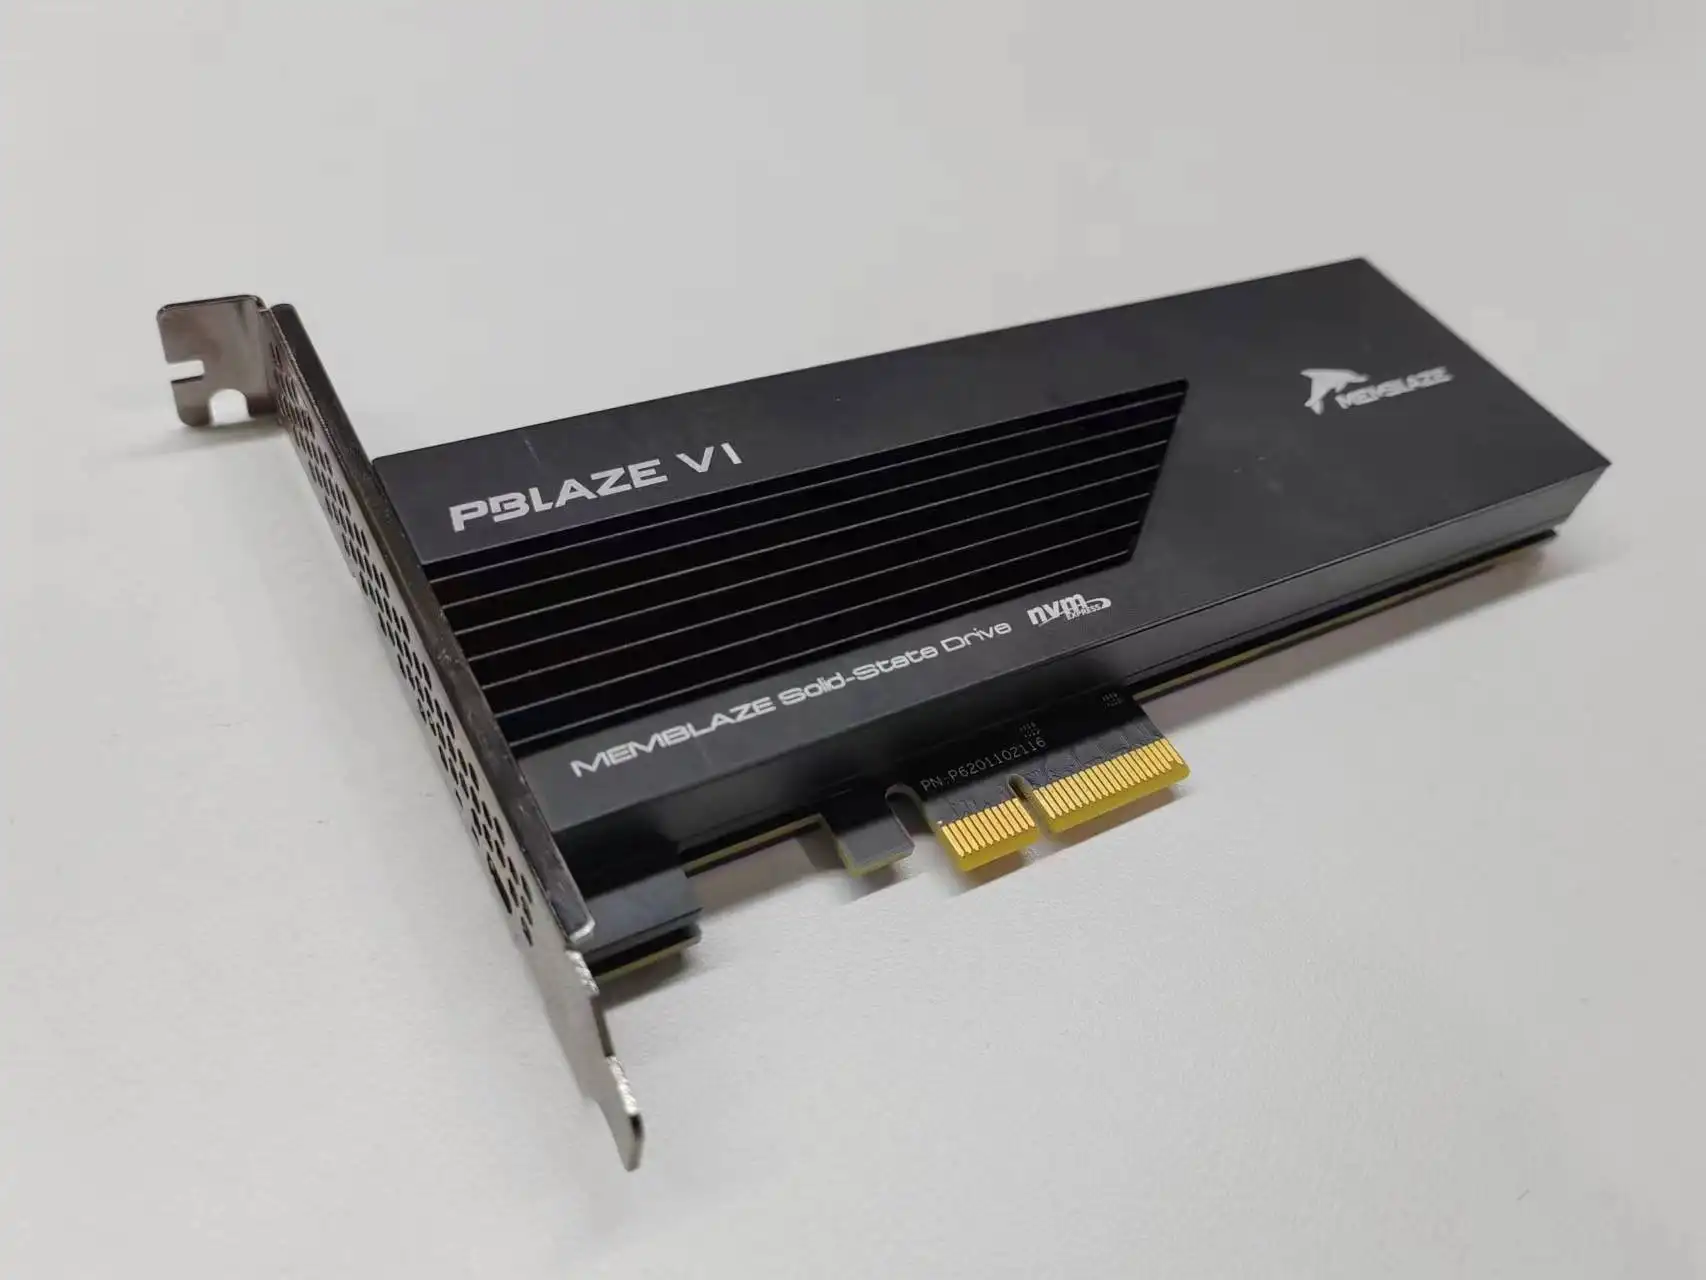 PBlaze66530 SATA SSD 3D Nand NVMe1.4 PCIe 4.0 AIC 1.92T 2T SSDよりも優れたパフォーマンス